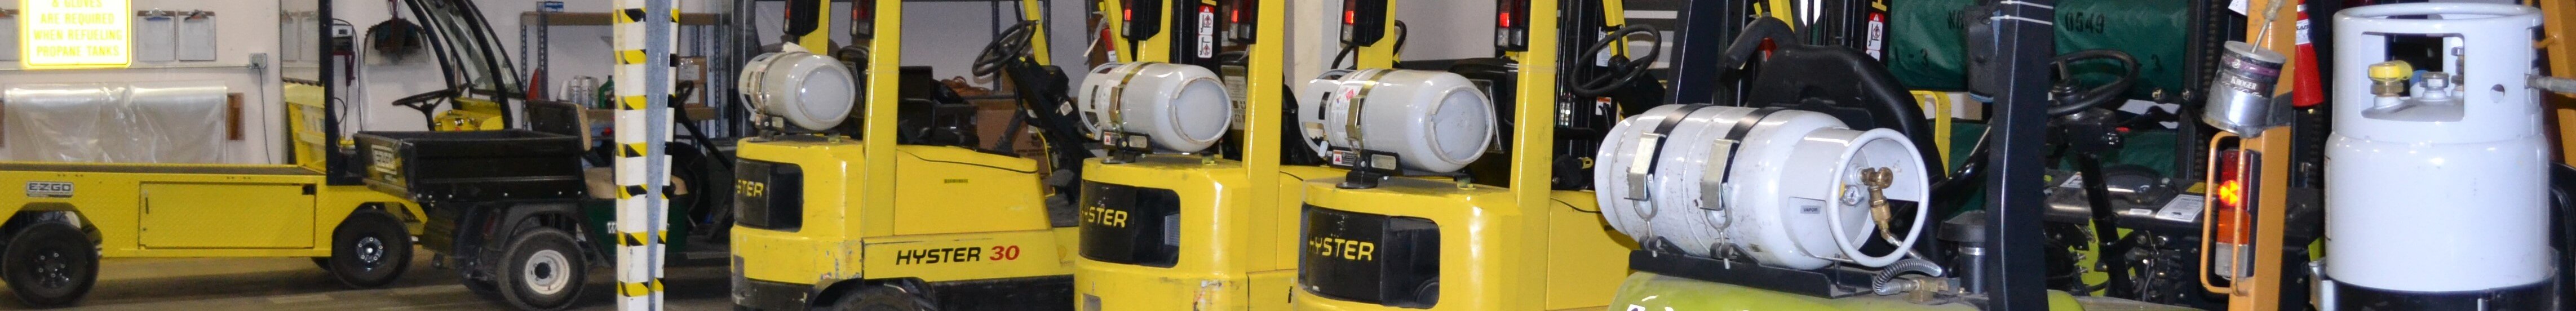 Propane cylinders mounted on forklifts